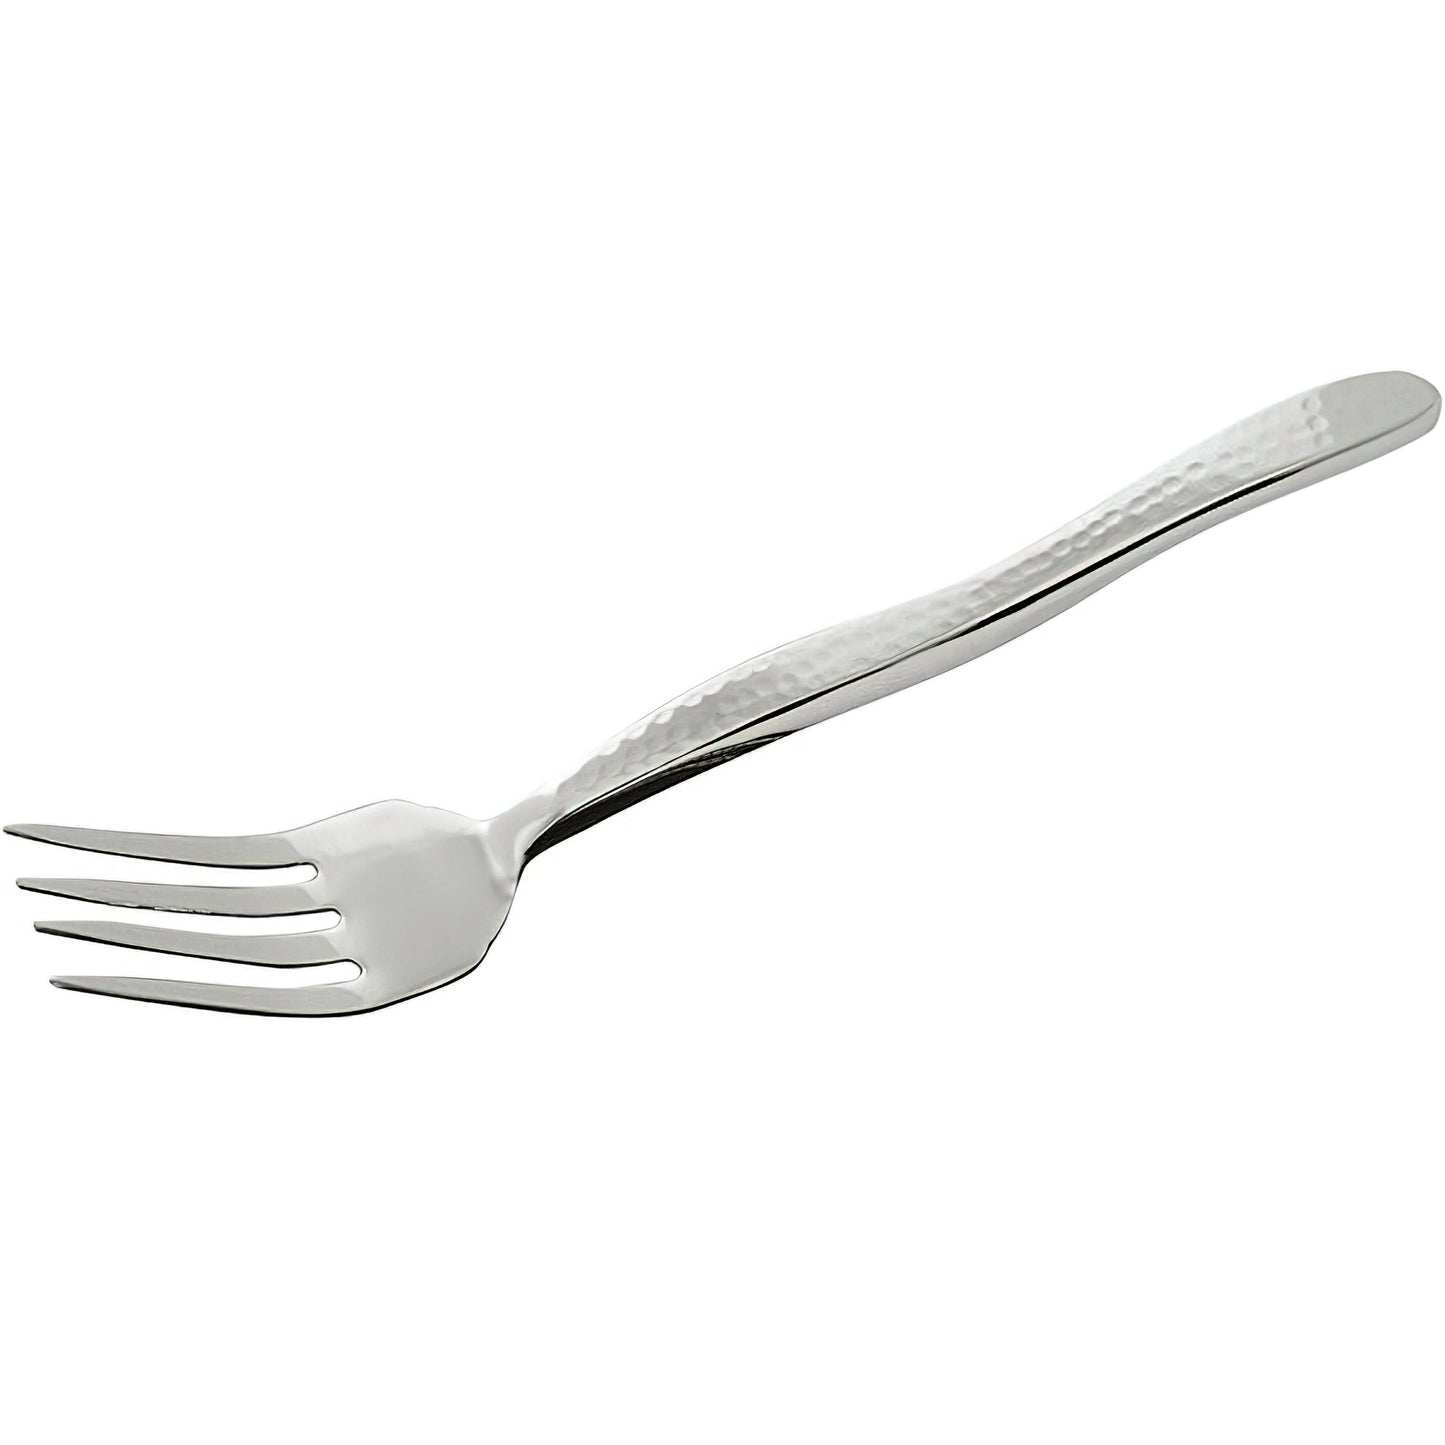 9.75" Stainless Steel 4-Tine Fork w/ Pounded Finish